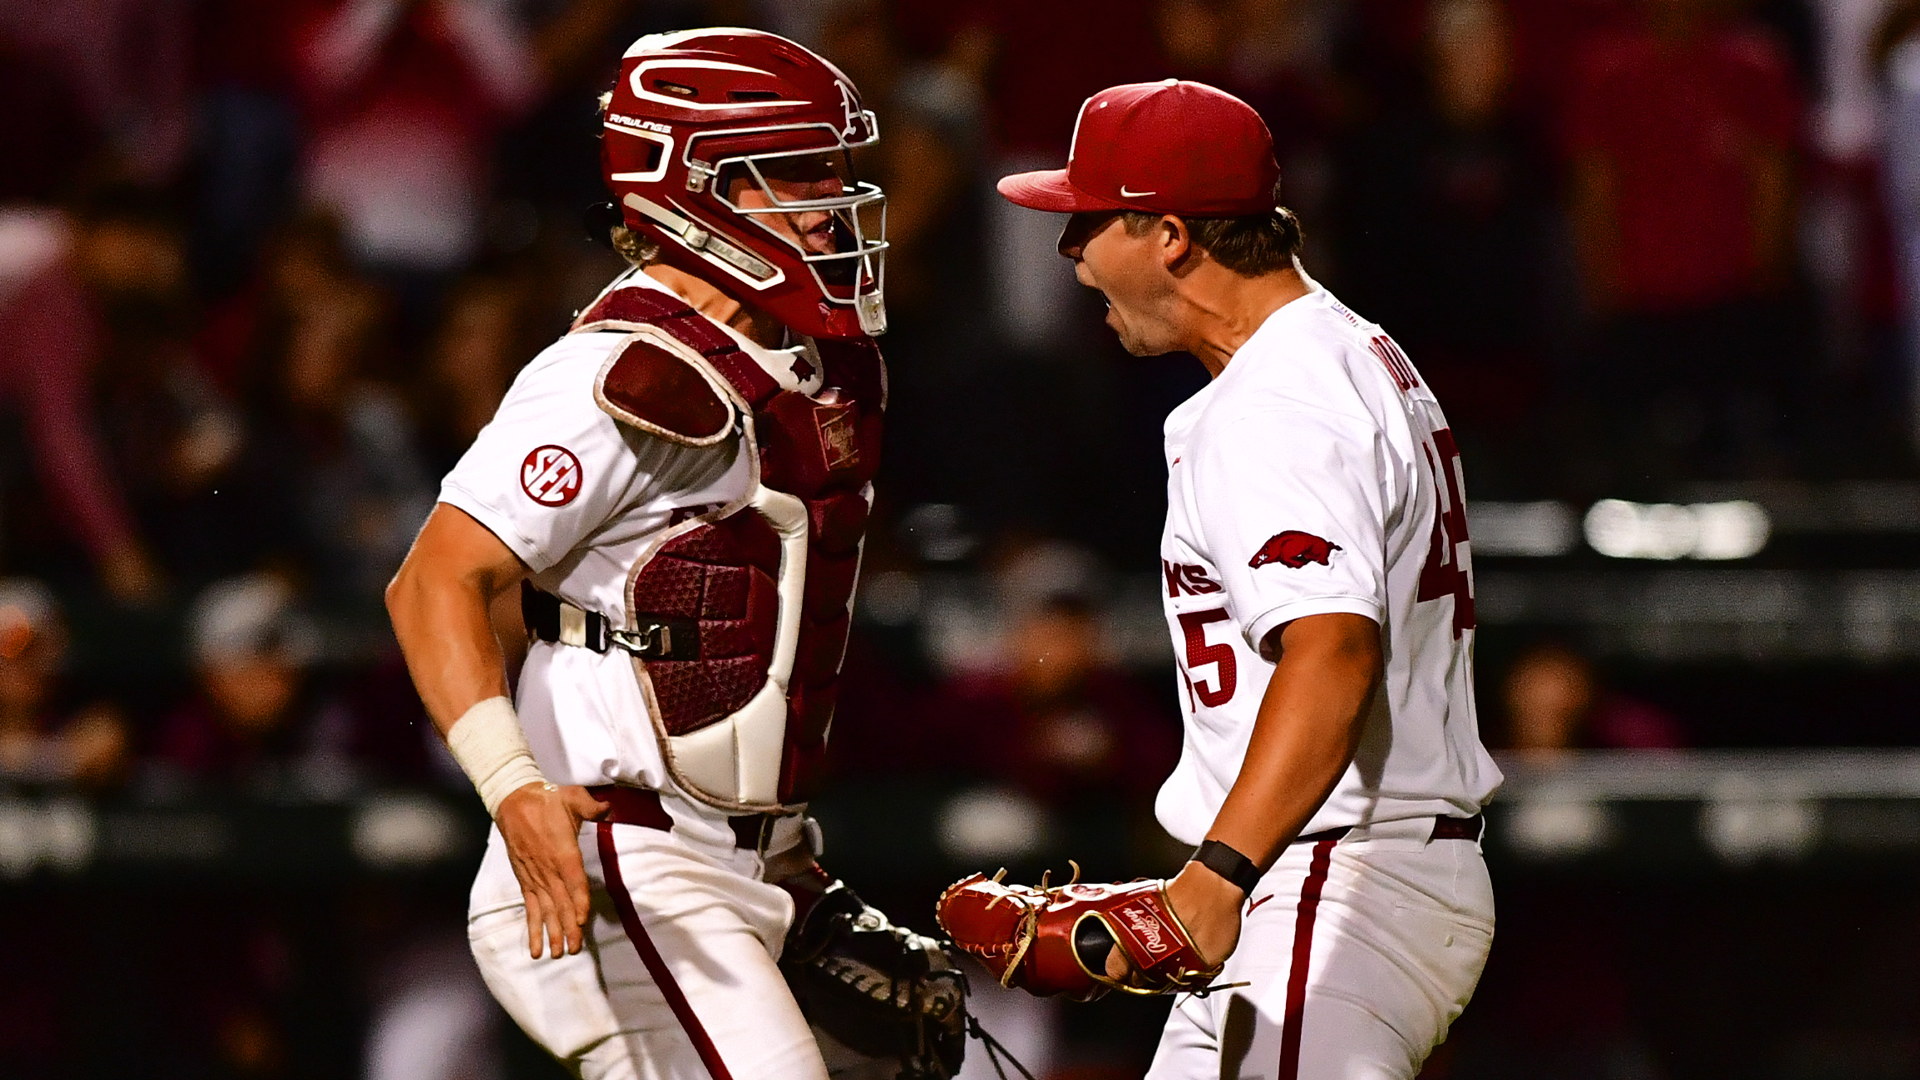 White’s Four RBI, Wood’s Bases-Loaded Save Help Hogs Take Game One in Comeback Fashion